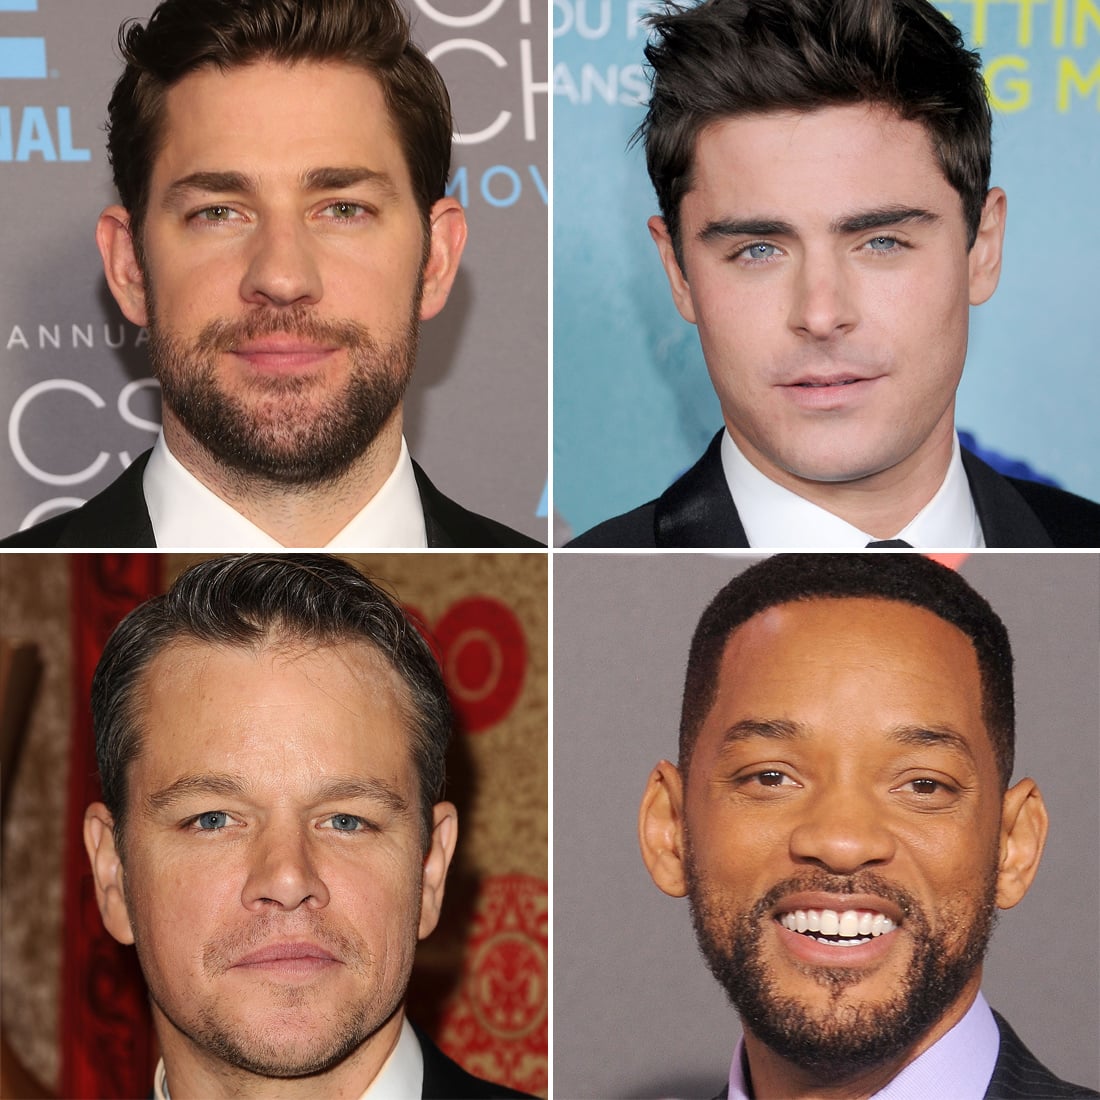 Your who celebrity match is Love Quiz: